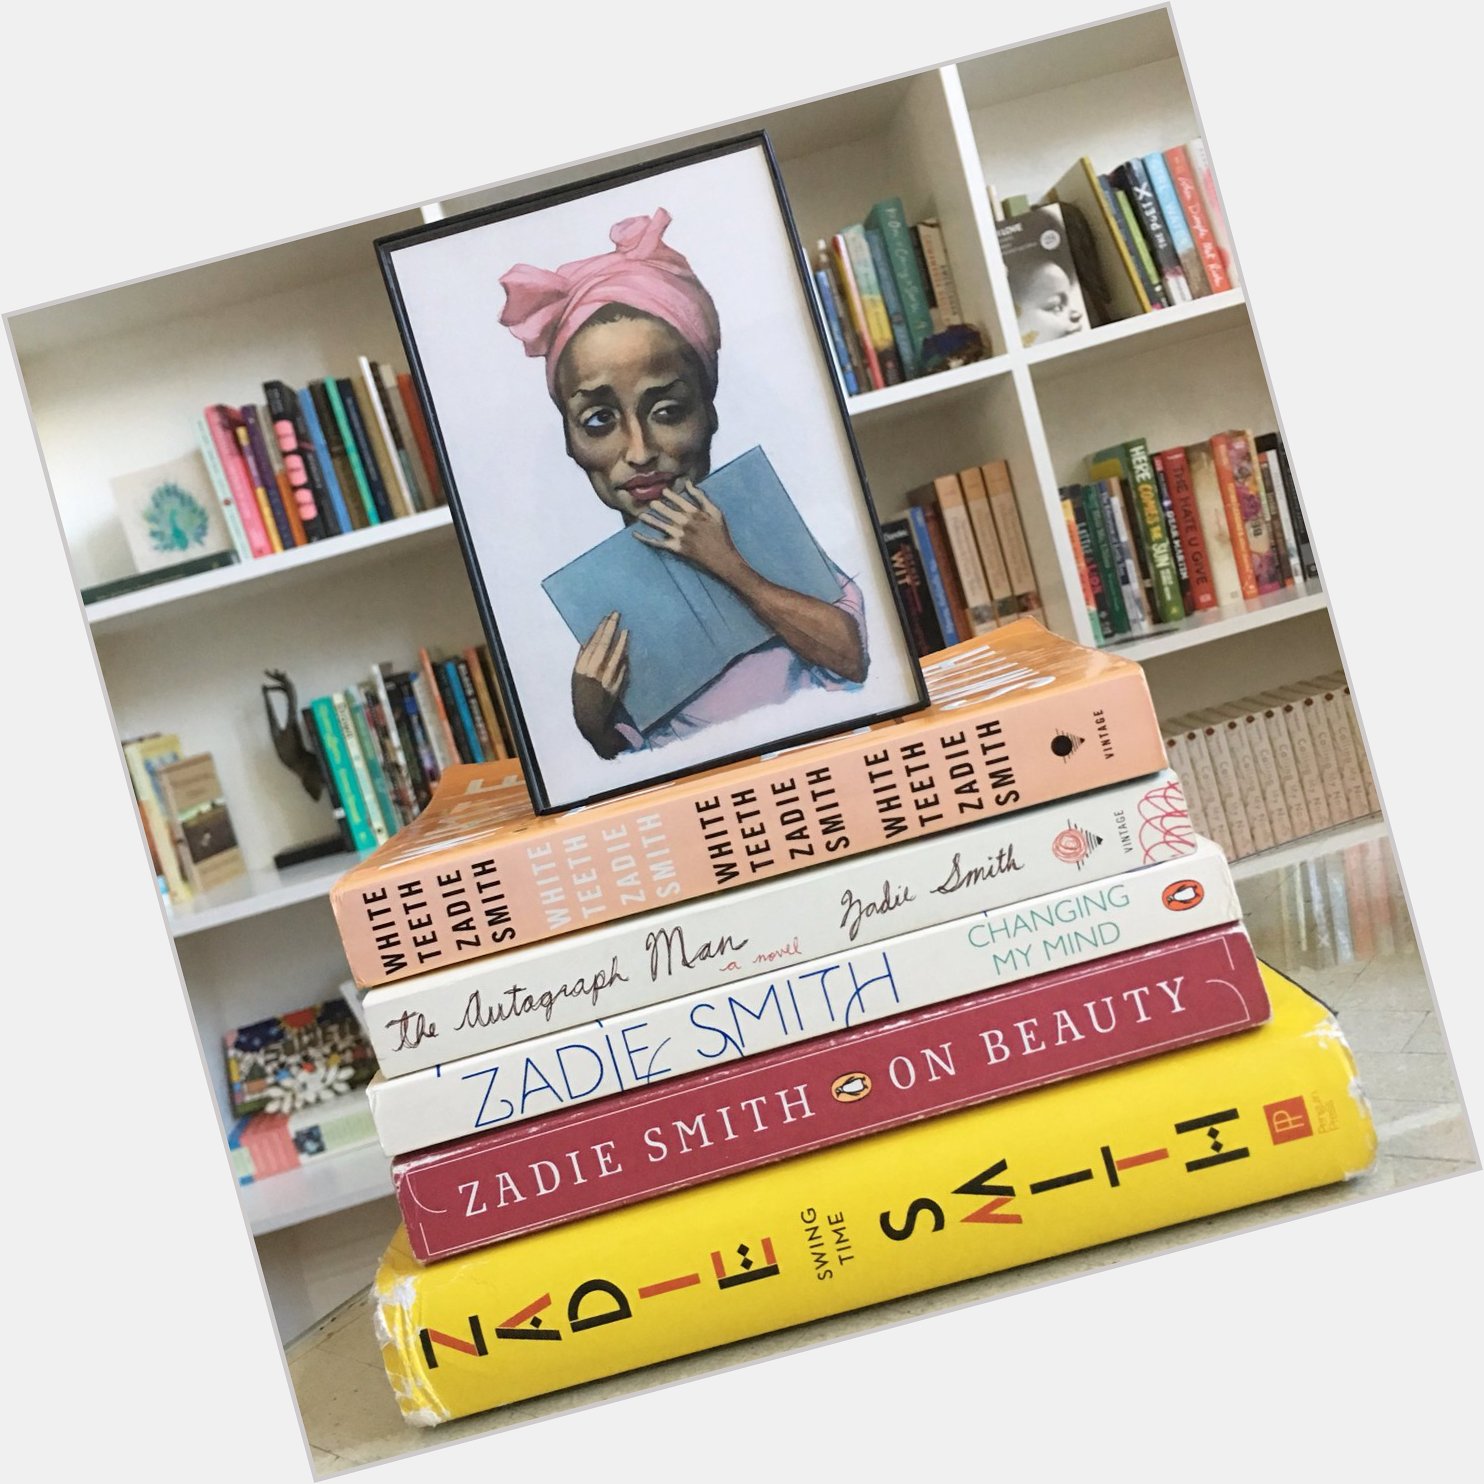 Happy birthday to the wise and brilliant Zadie Smith.   